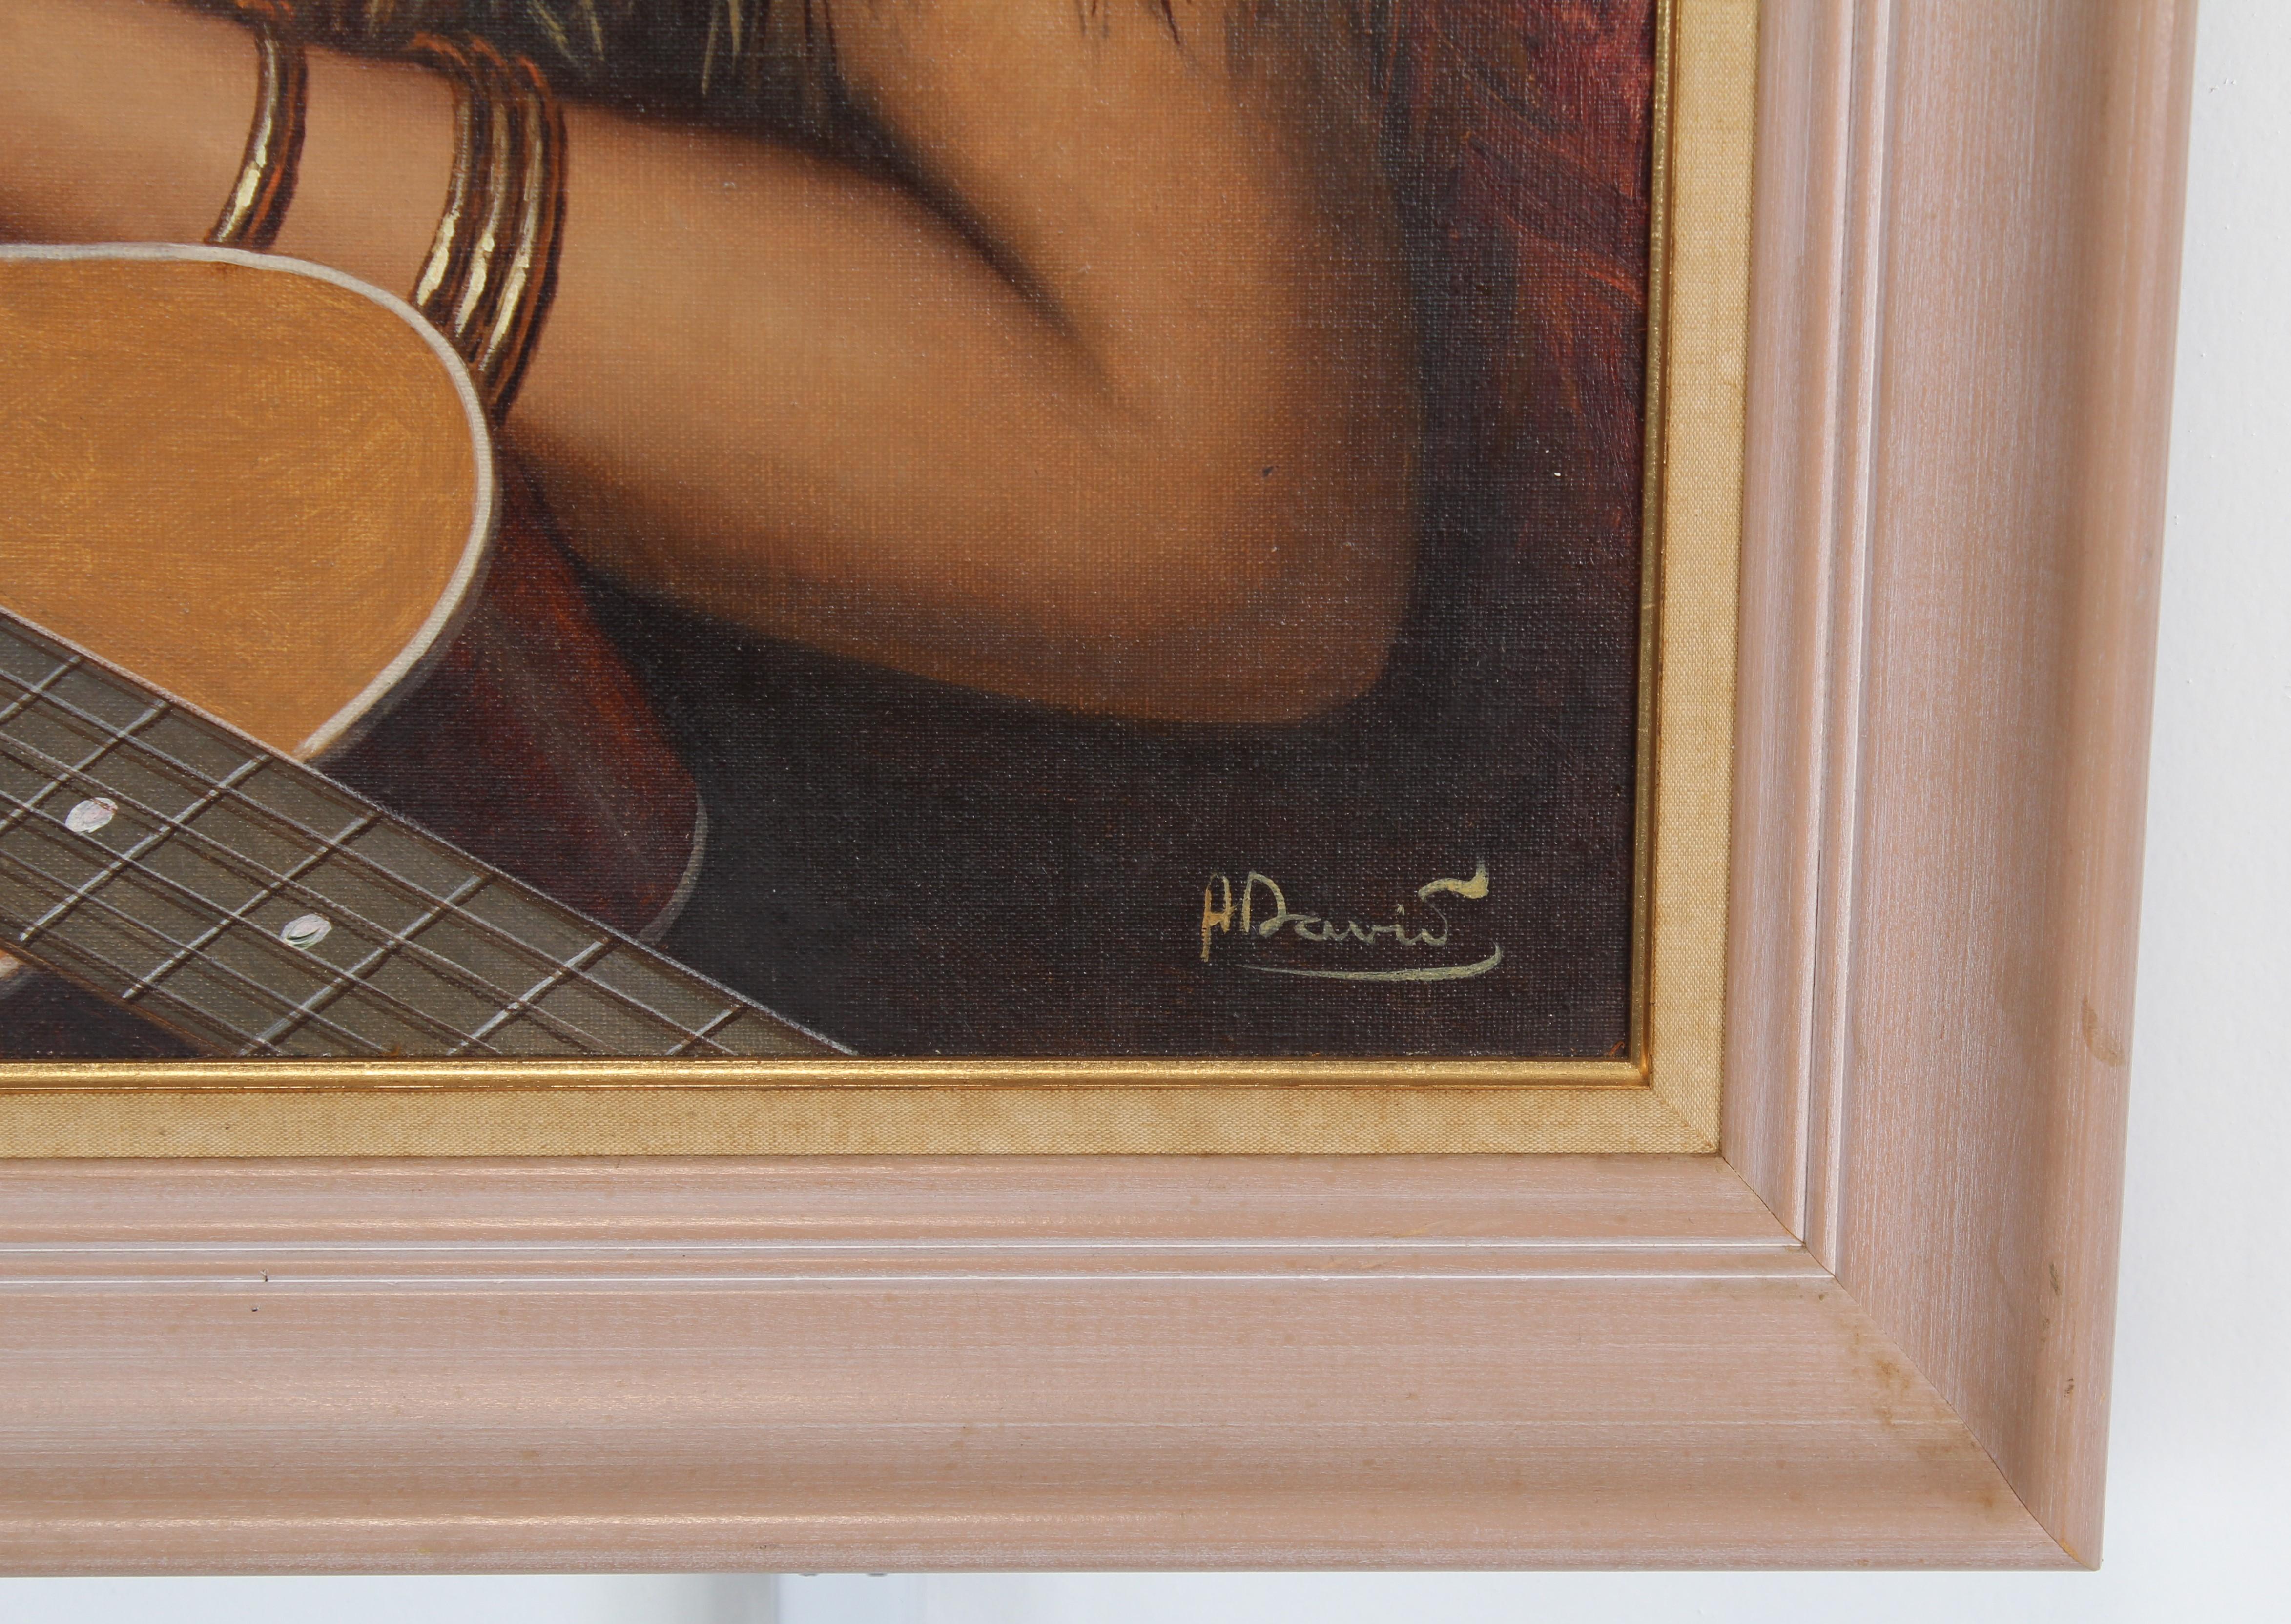 Oil painting of Gypsy Woman with Guitar by Hungarian artist, Andras David. The painting is on canvas attached to a board. A wonderful rendition of a beautiful Gypsy woman signed 